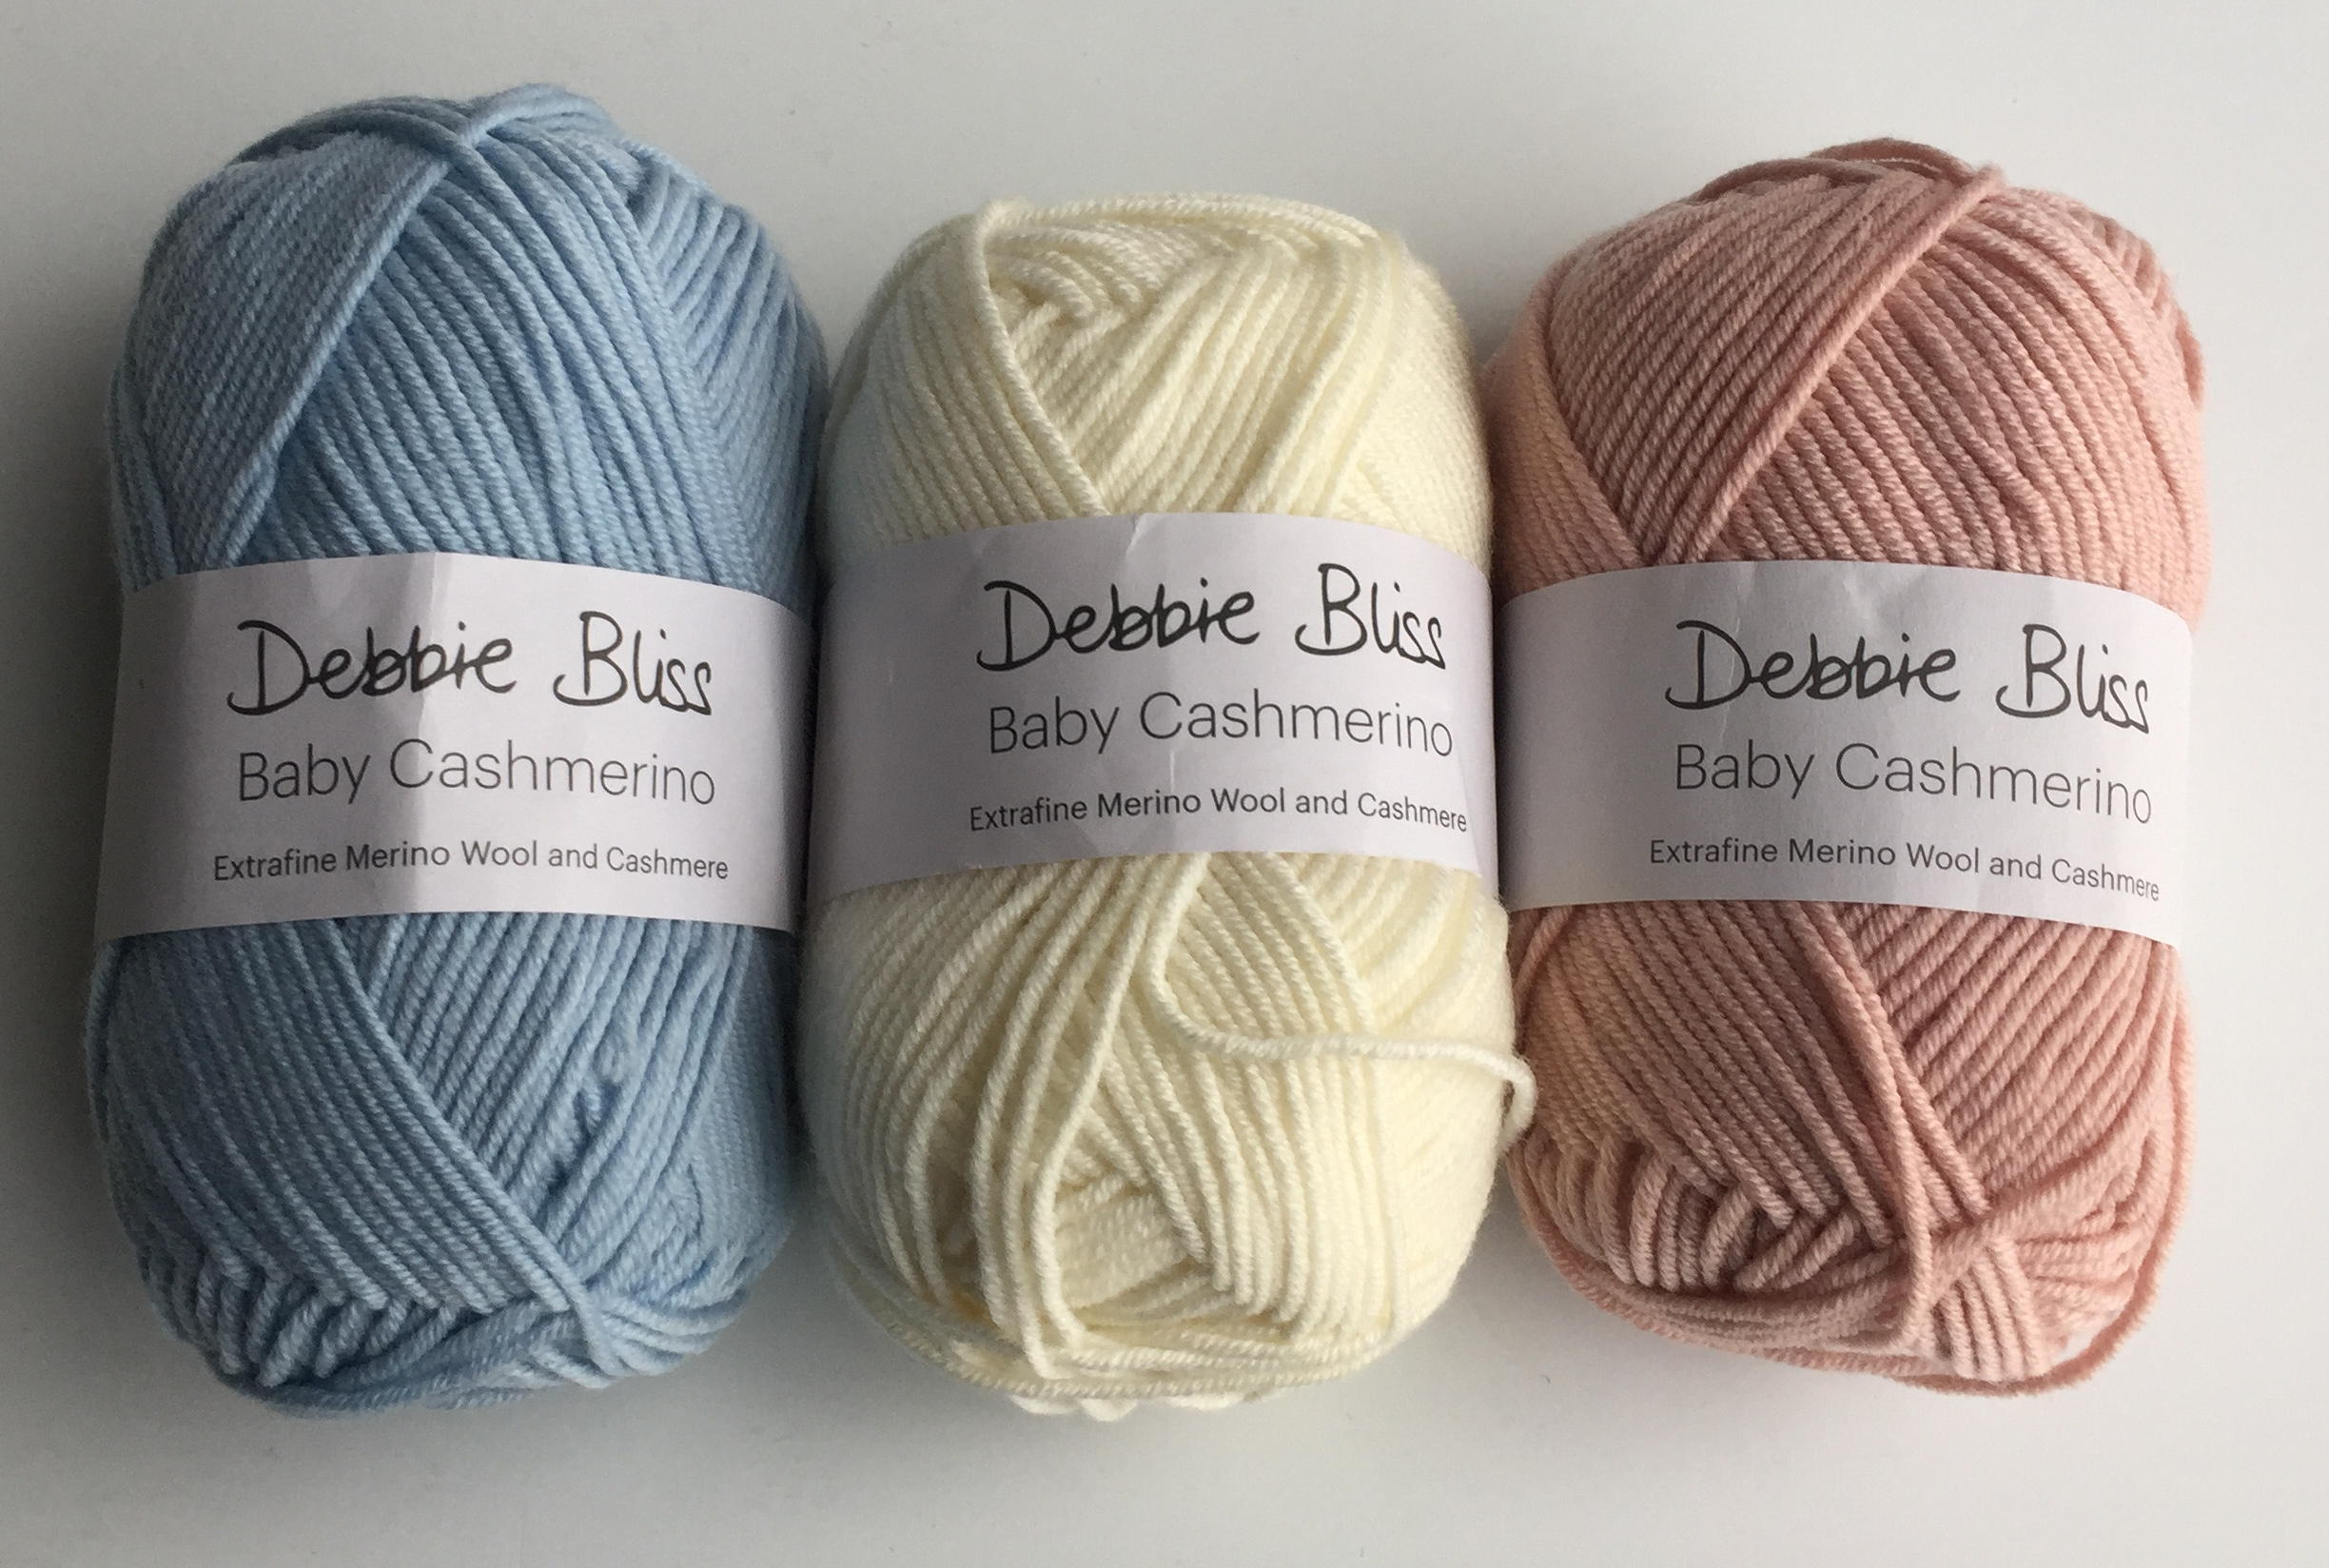 Debbie Bliss Patterns: A Haven of Inspiration for Knitters of All ...